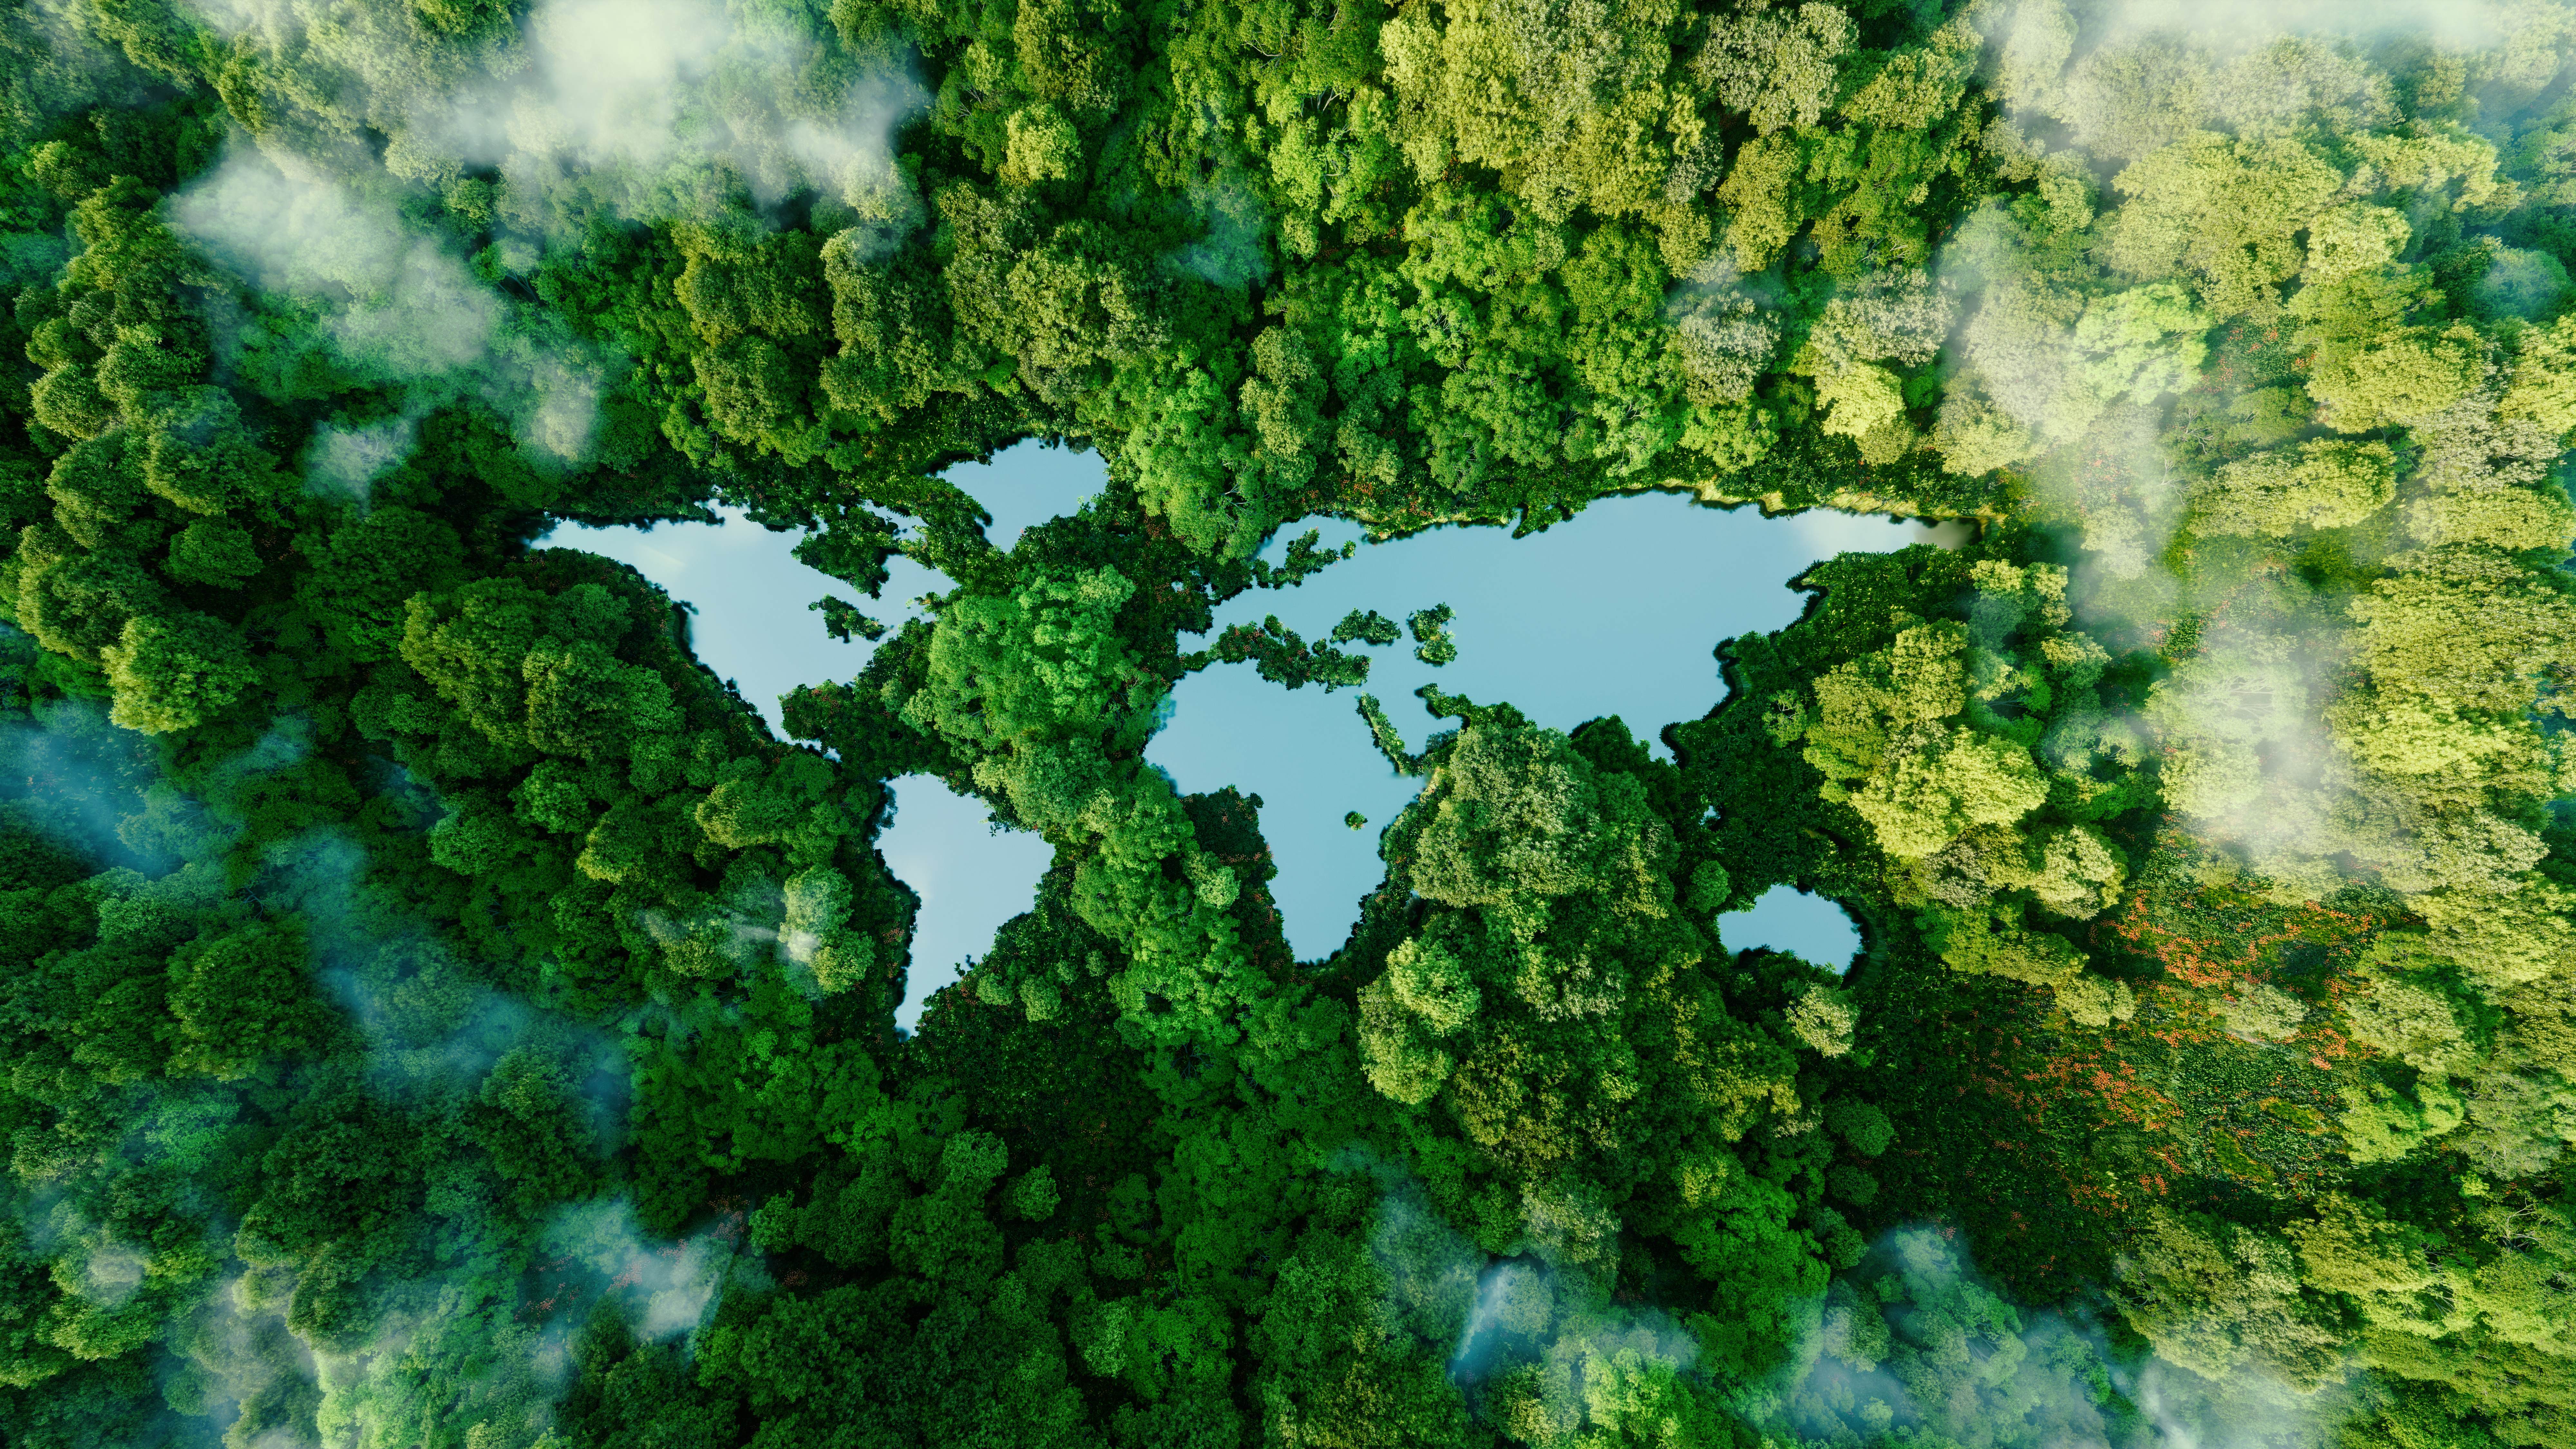 World map formed by aerial view of water in trees